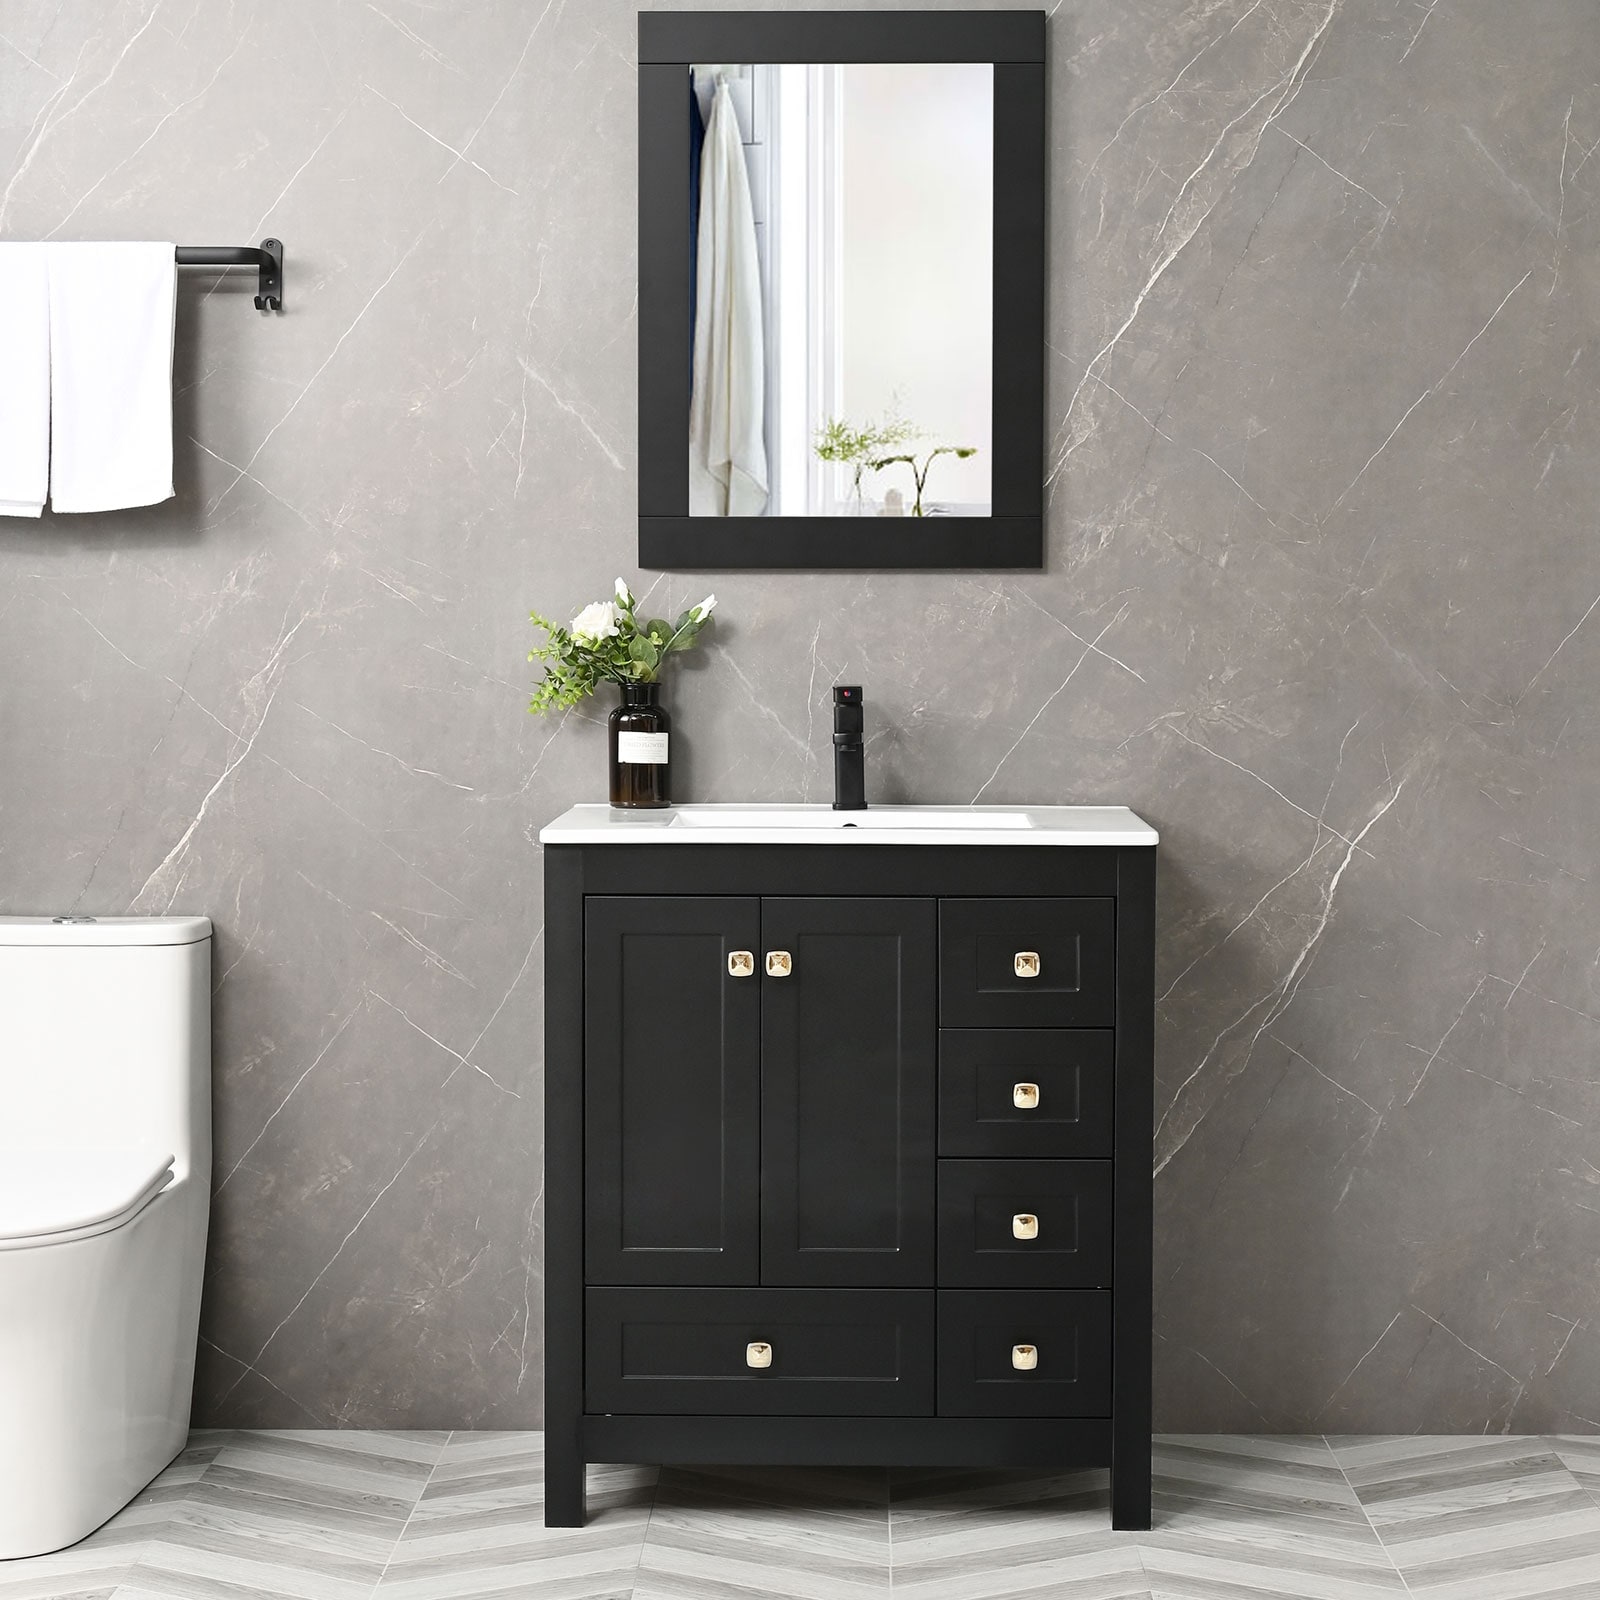 https://ak1.ostkcdn.com/images/products/is/images/direct/9cadfc847745567ac9d8a6fb9559e7b619291cb4/Eclife-30%22-Bathroom-Vanity-Set-W-Drop-in-Sink-Cabinet-Mirror-Combo.jpg